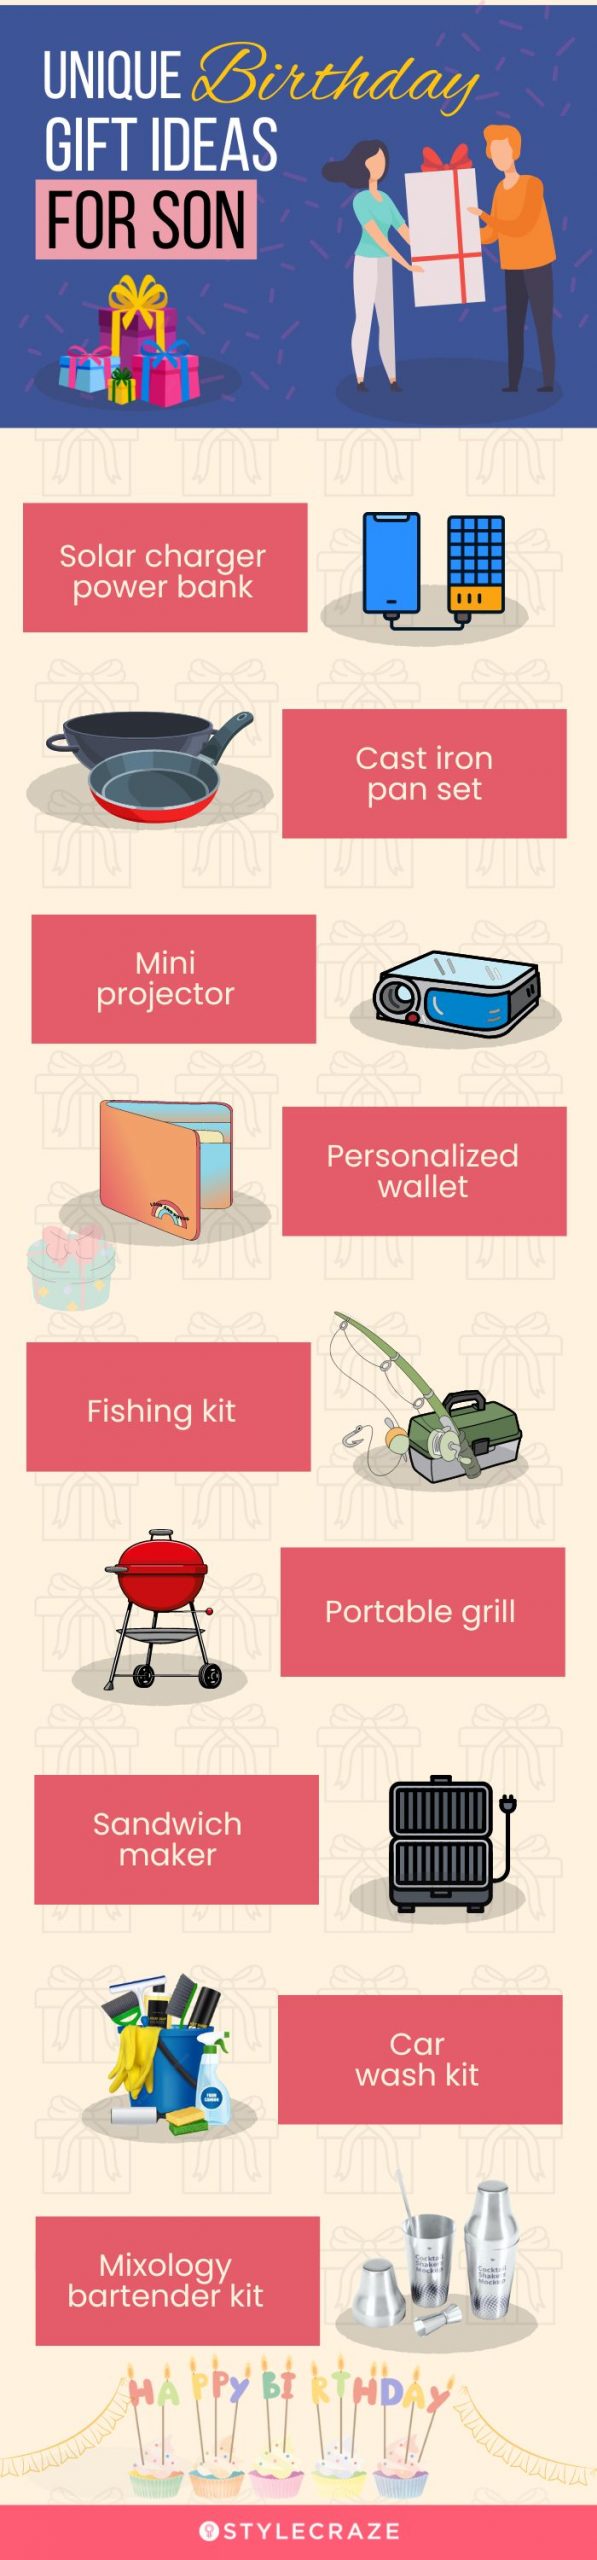 unique birthday gift ideas for son (infographic)